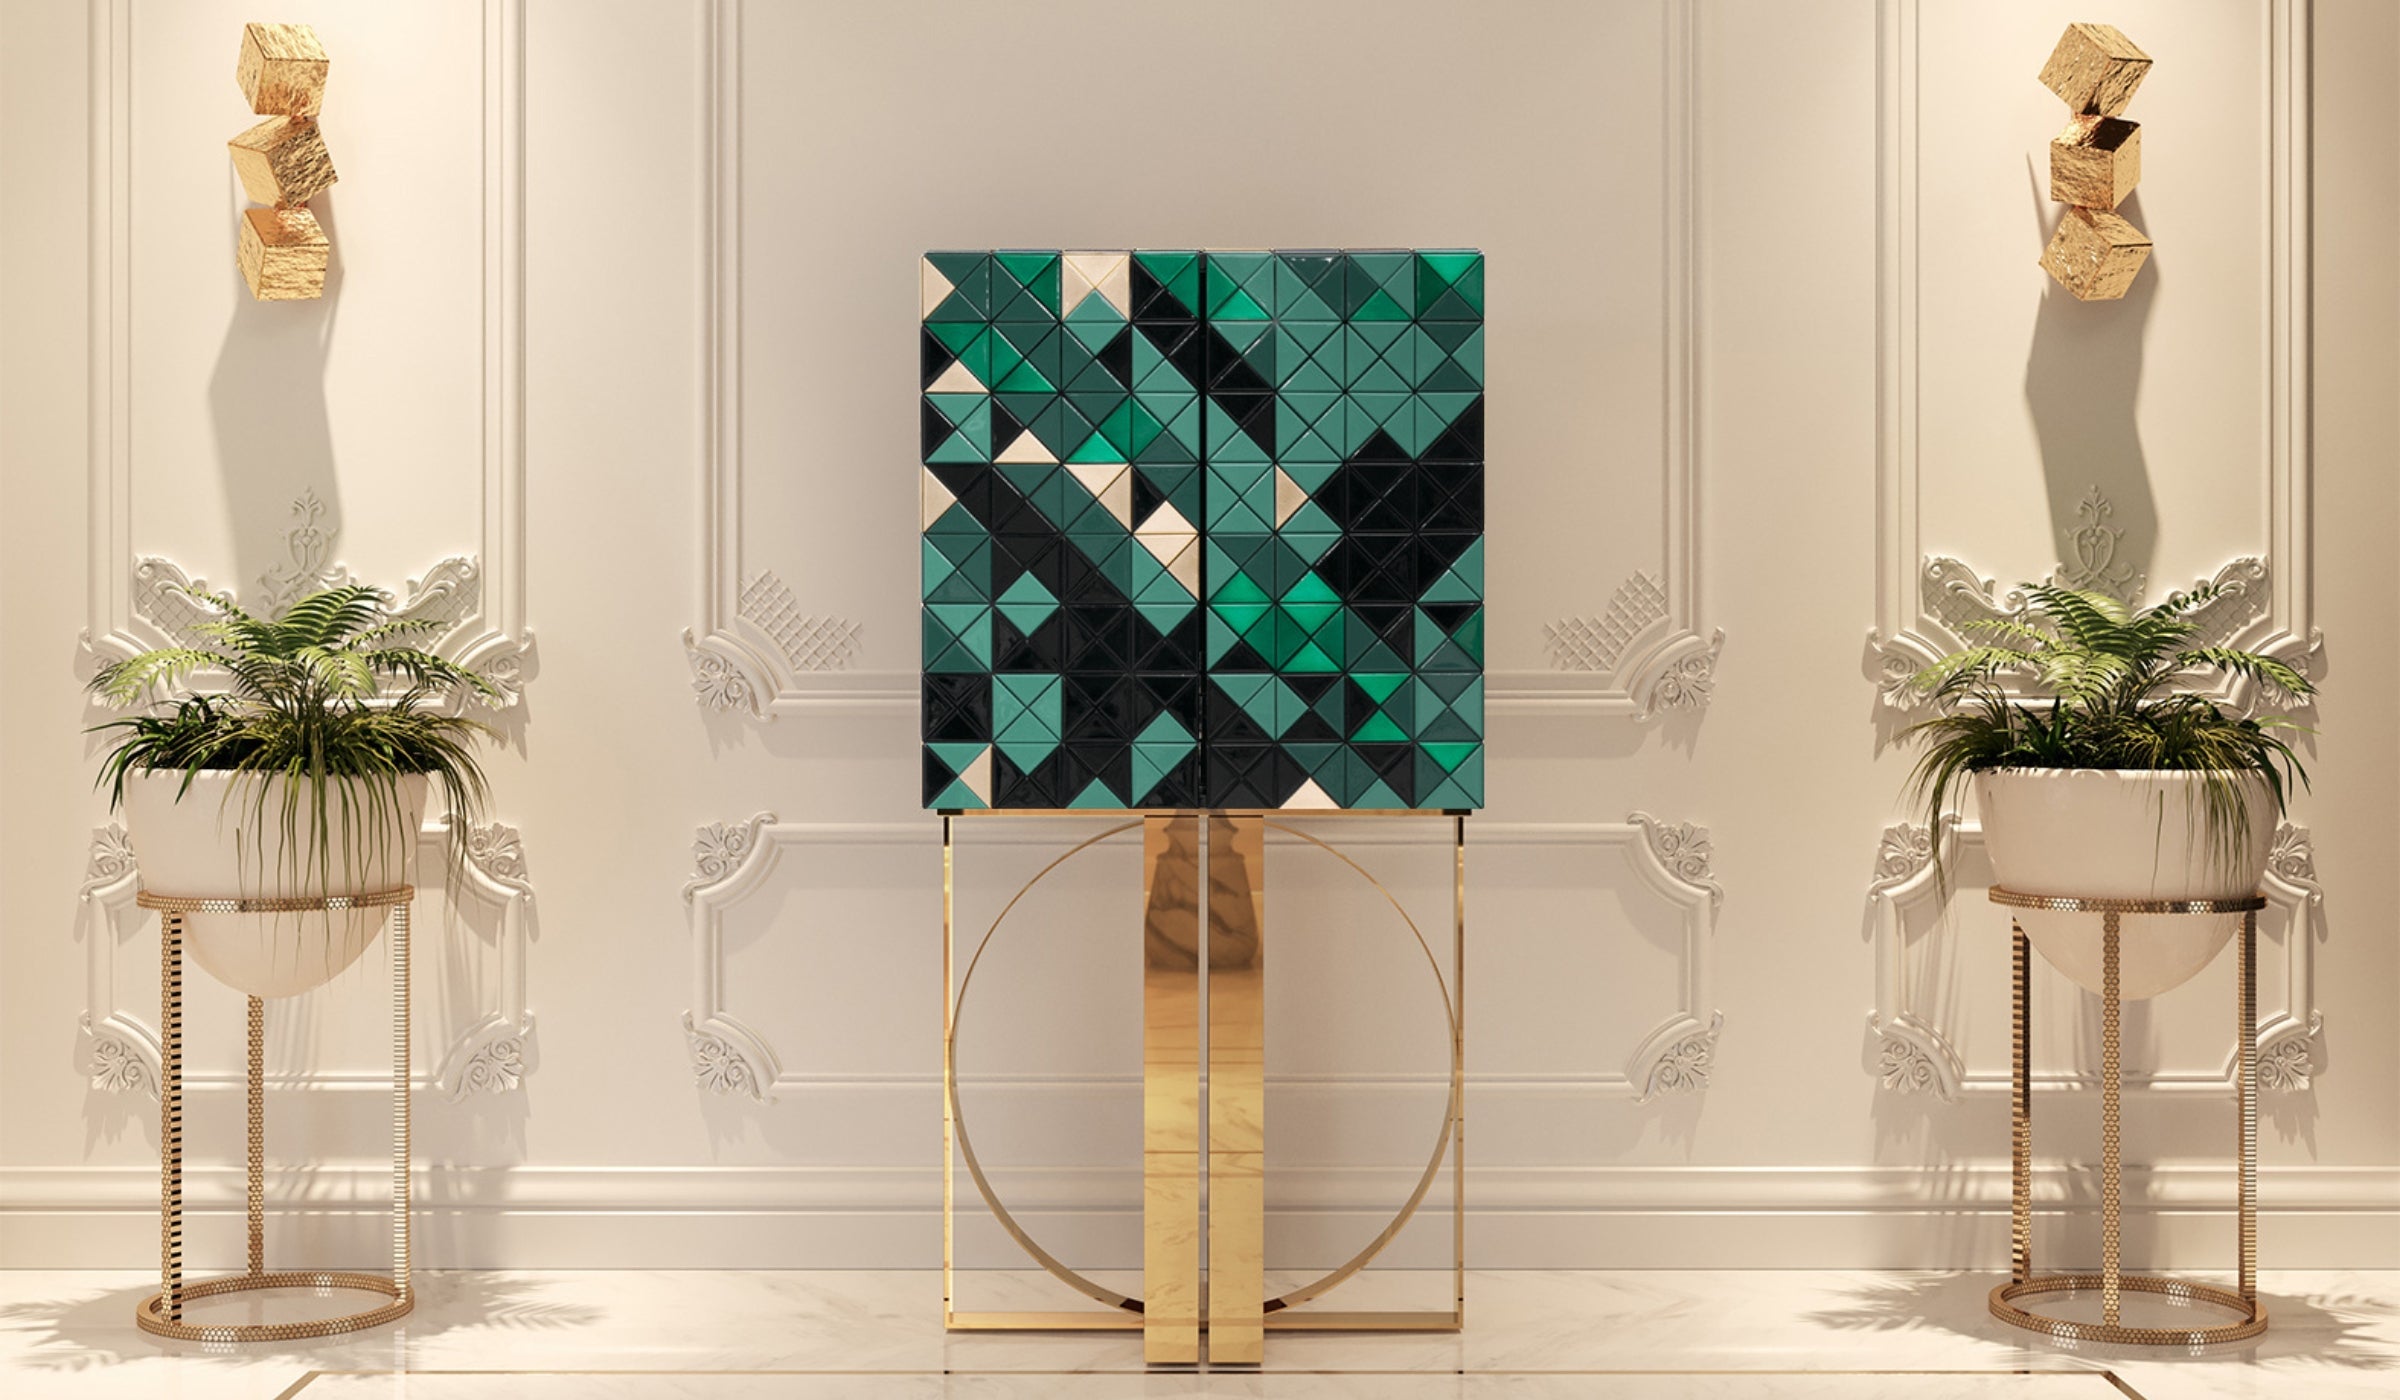 Pixel - Green and gold designer cabinet in wood and brass